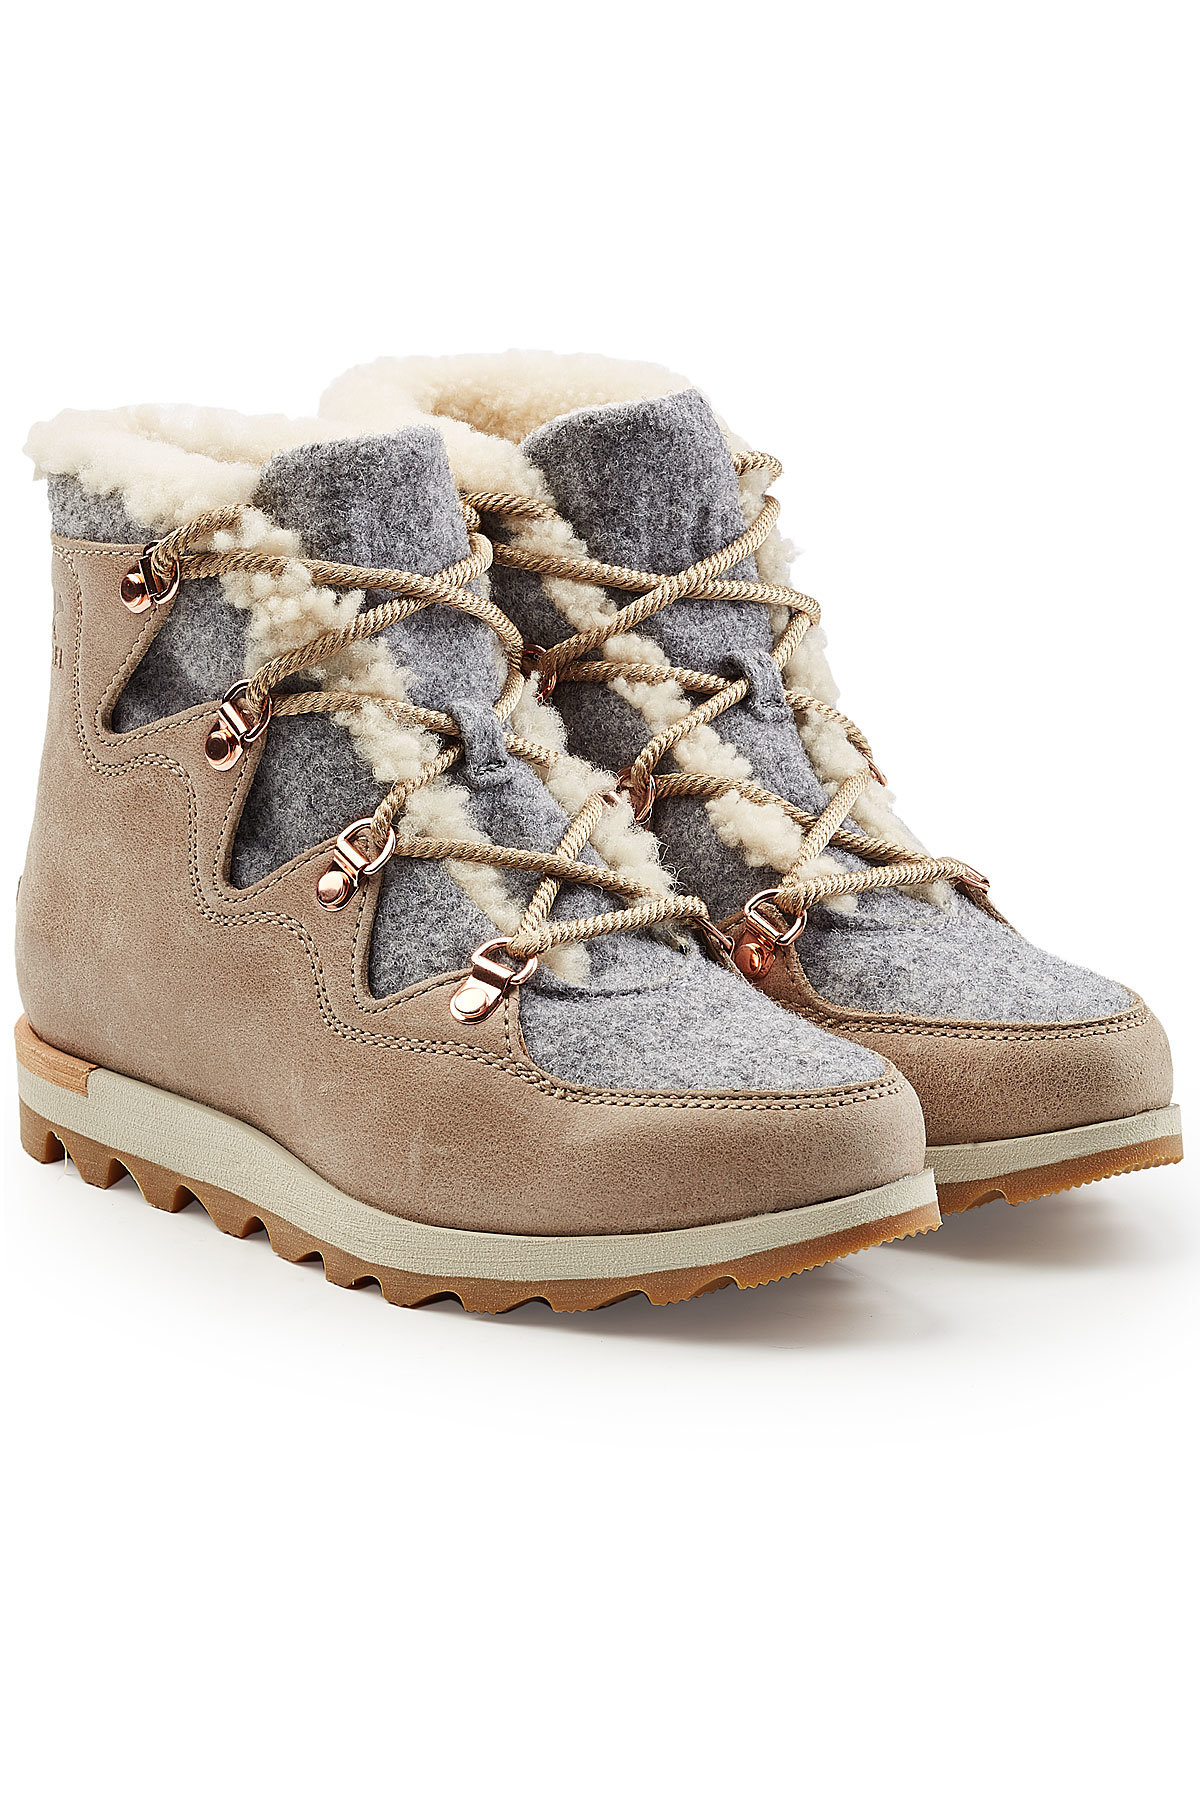 Sorel - Sneakchic Alpine Holiday Leather Ankle boots with Shearling